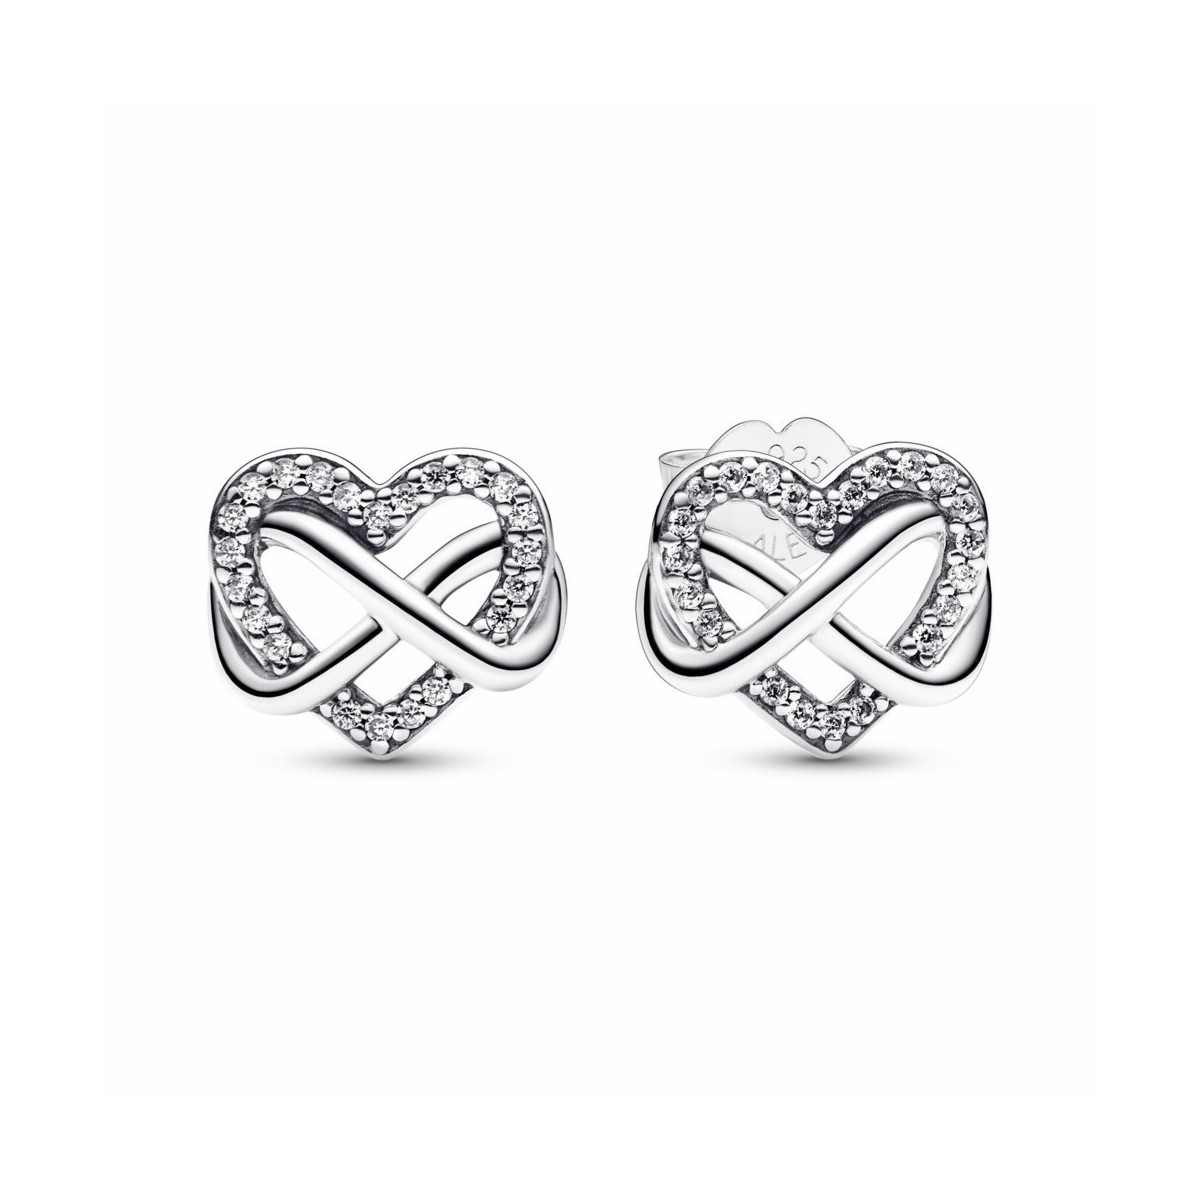 Infinity heart sterling silver stud earrings with clear cubi